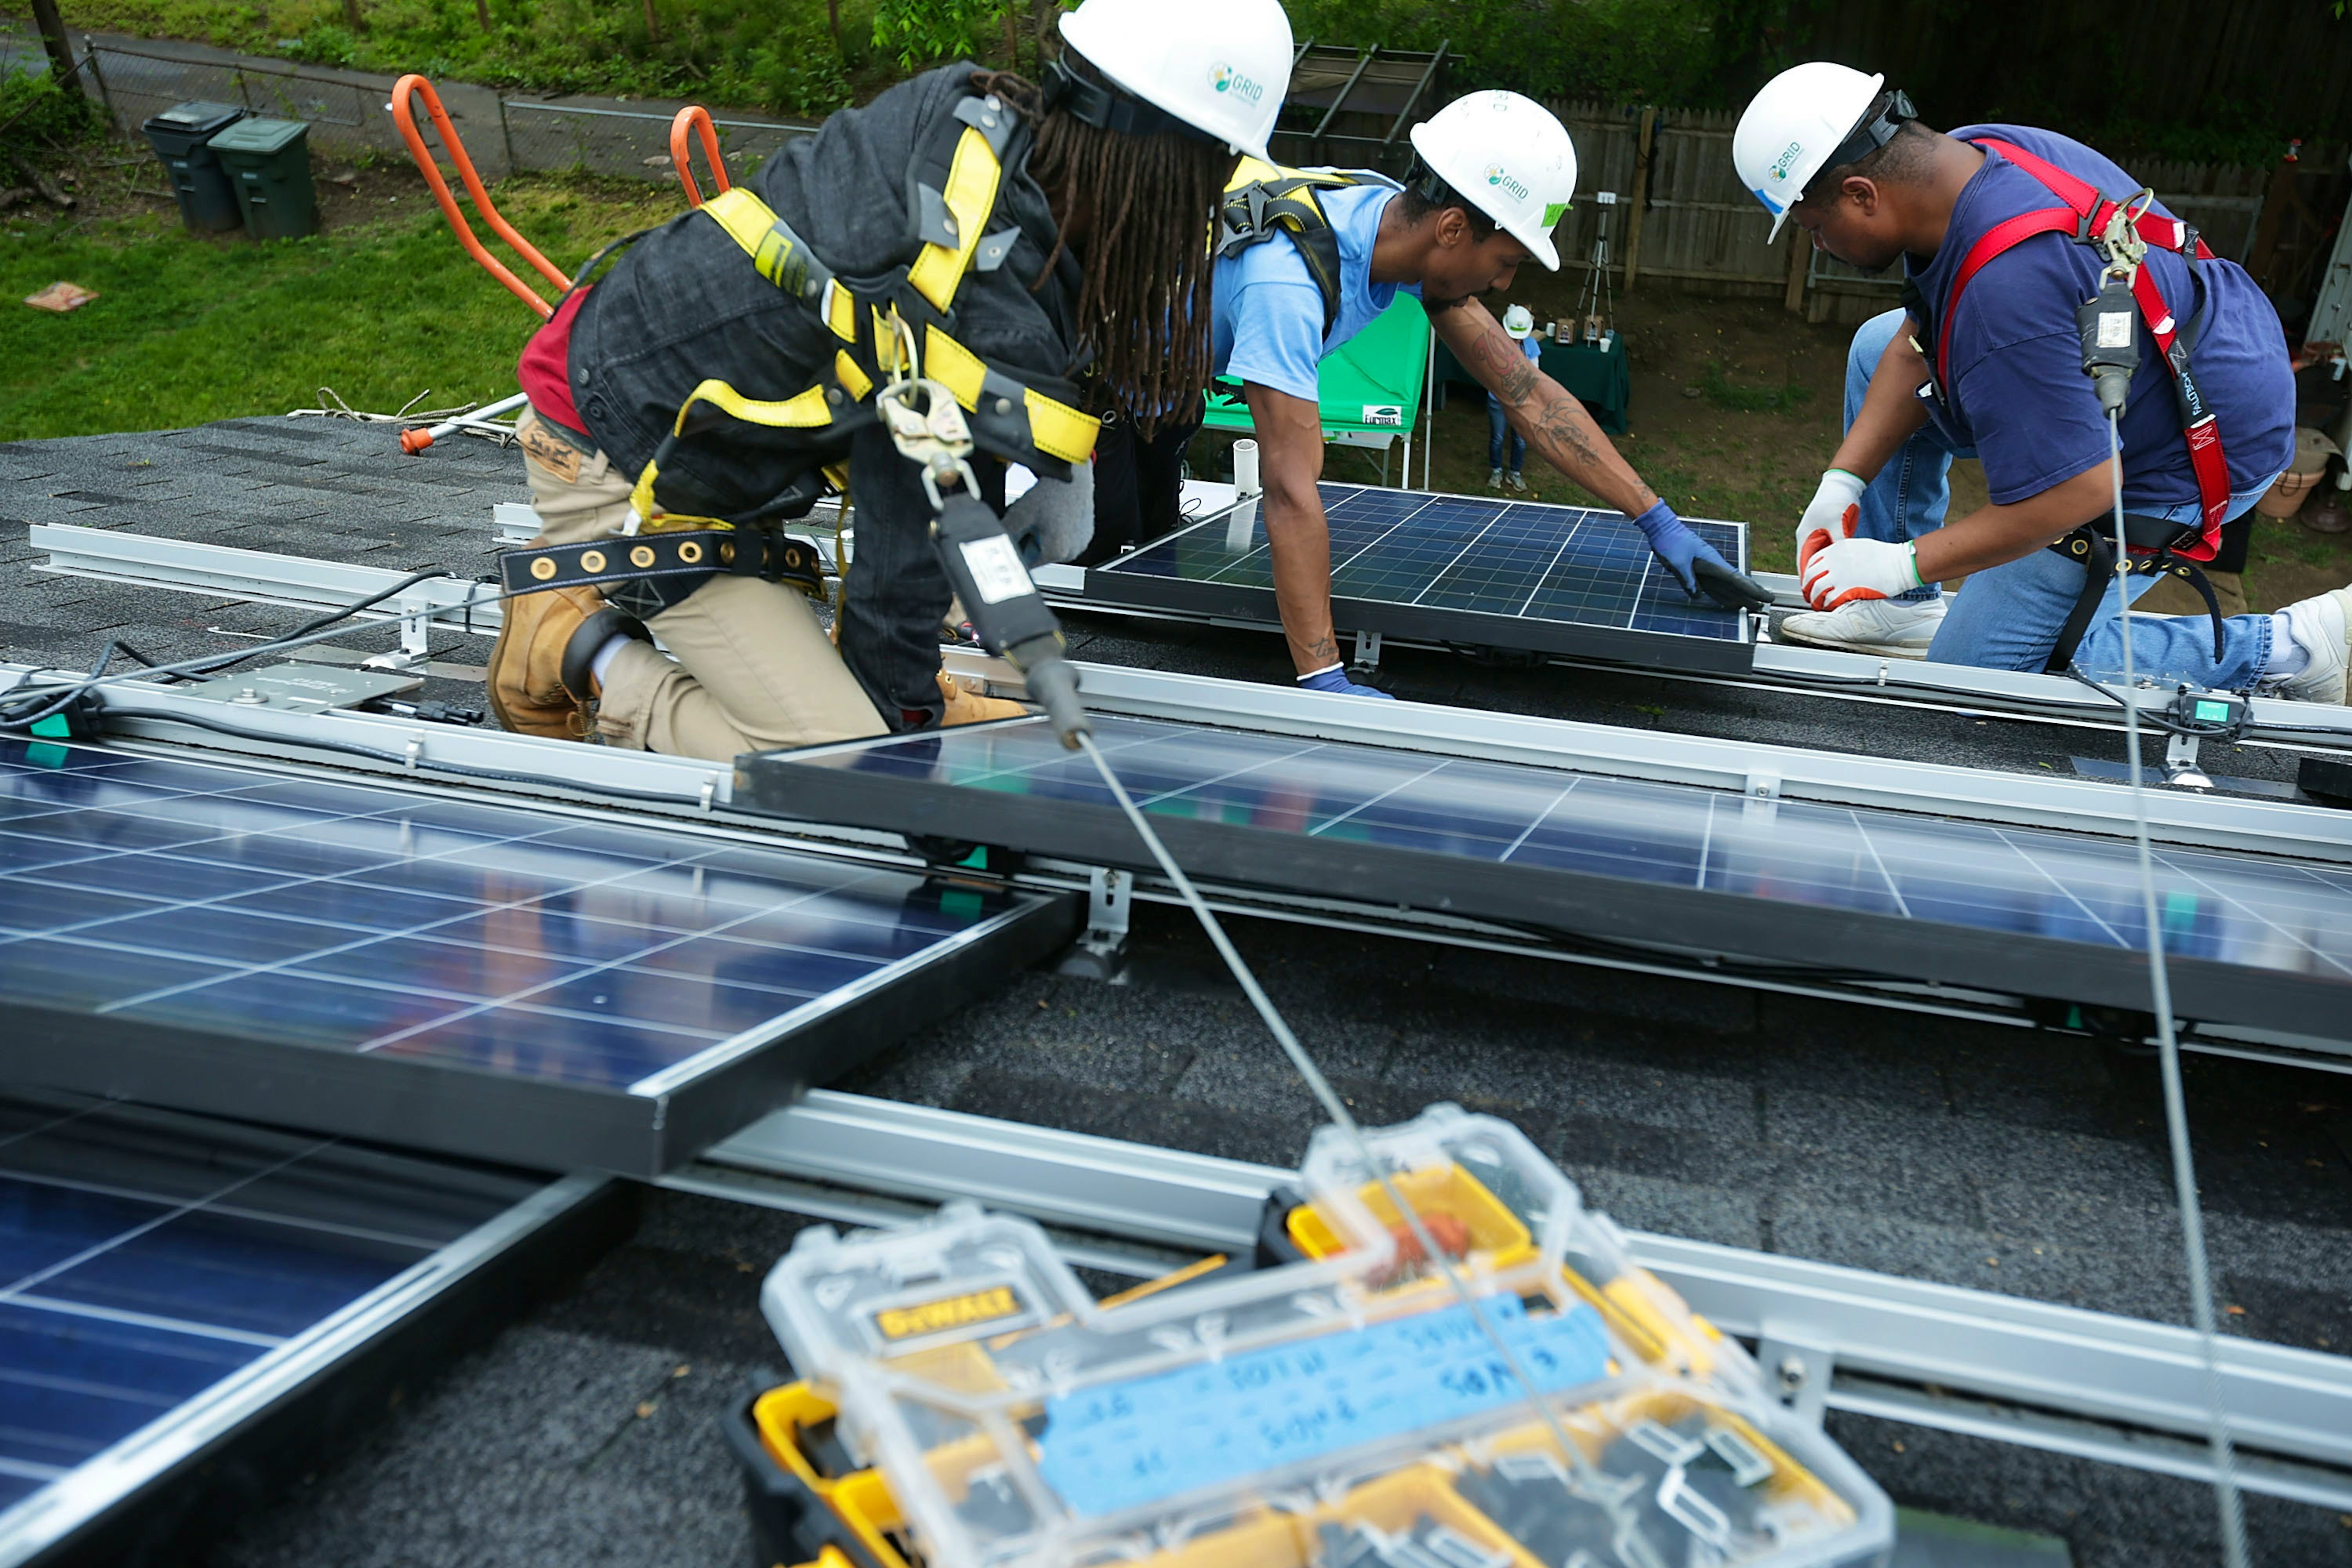 Annual Solar Installations to Hit “2 Million Within the Next 2 Years